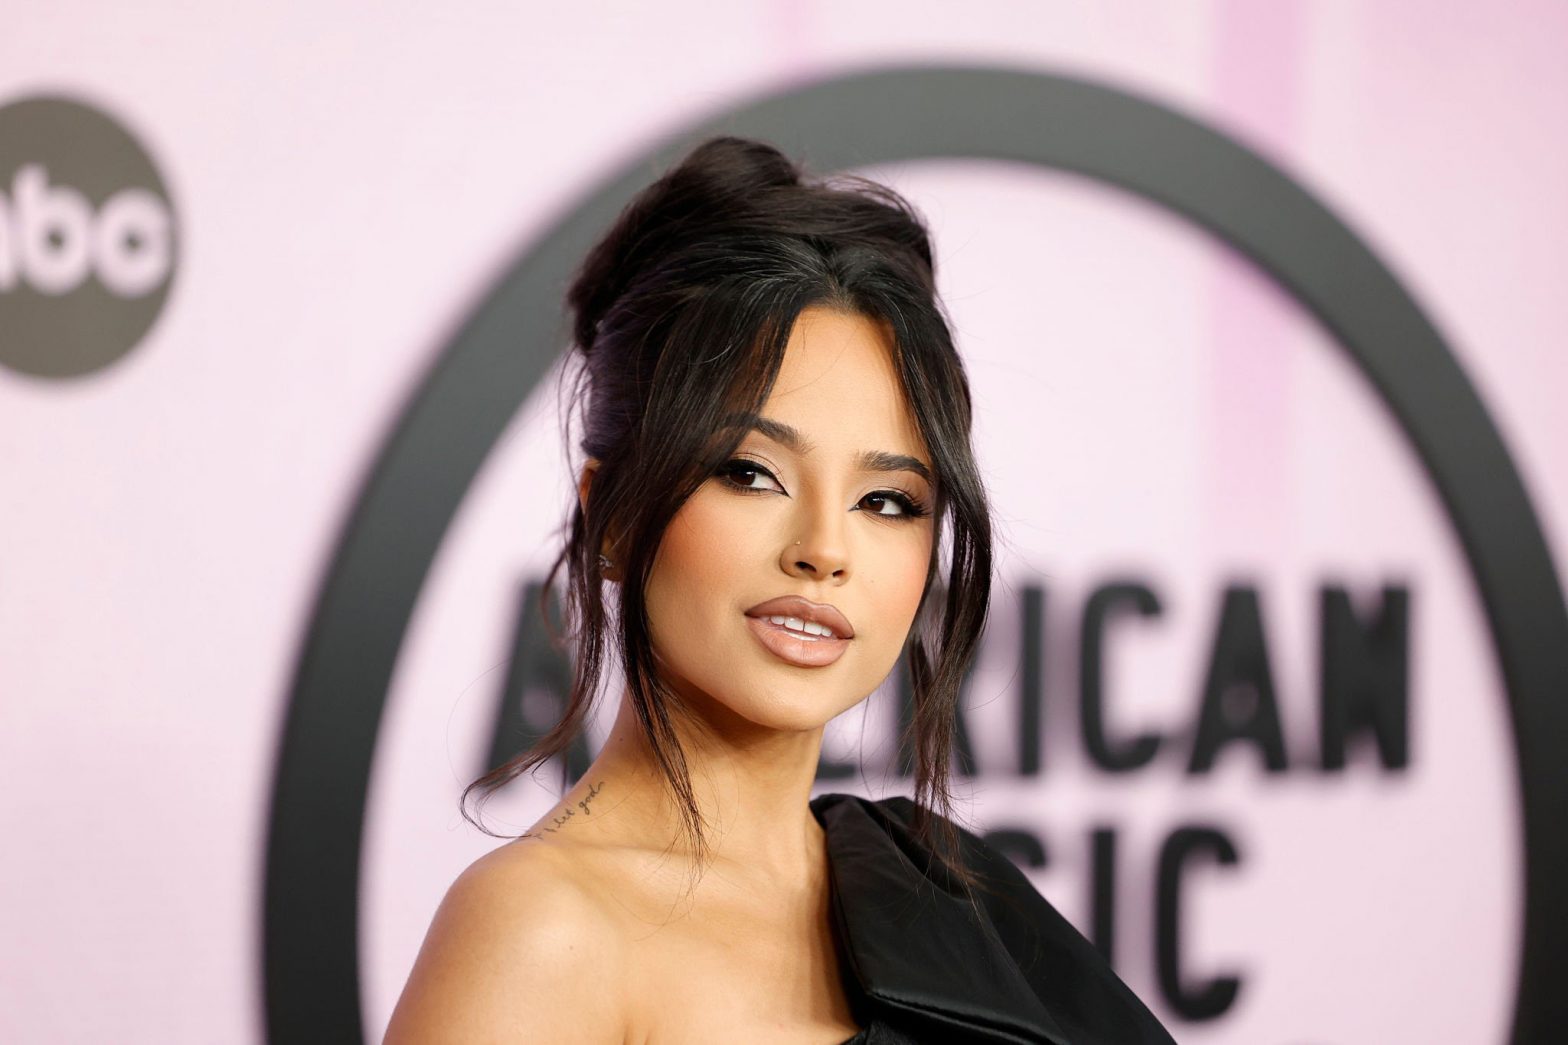 Becky G to Jimmie Allen: Who is performing at the WrestleMania 39 at the SoFi Stadium?